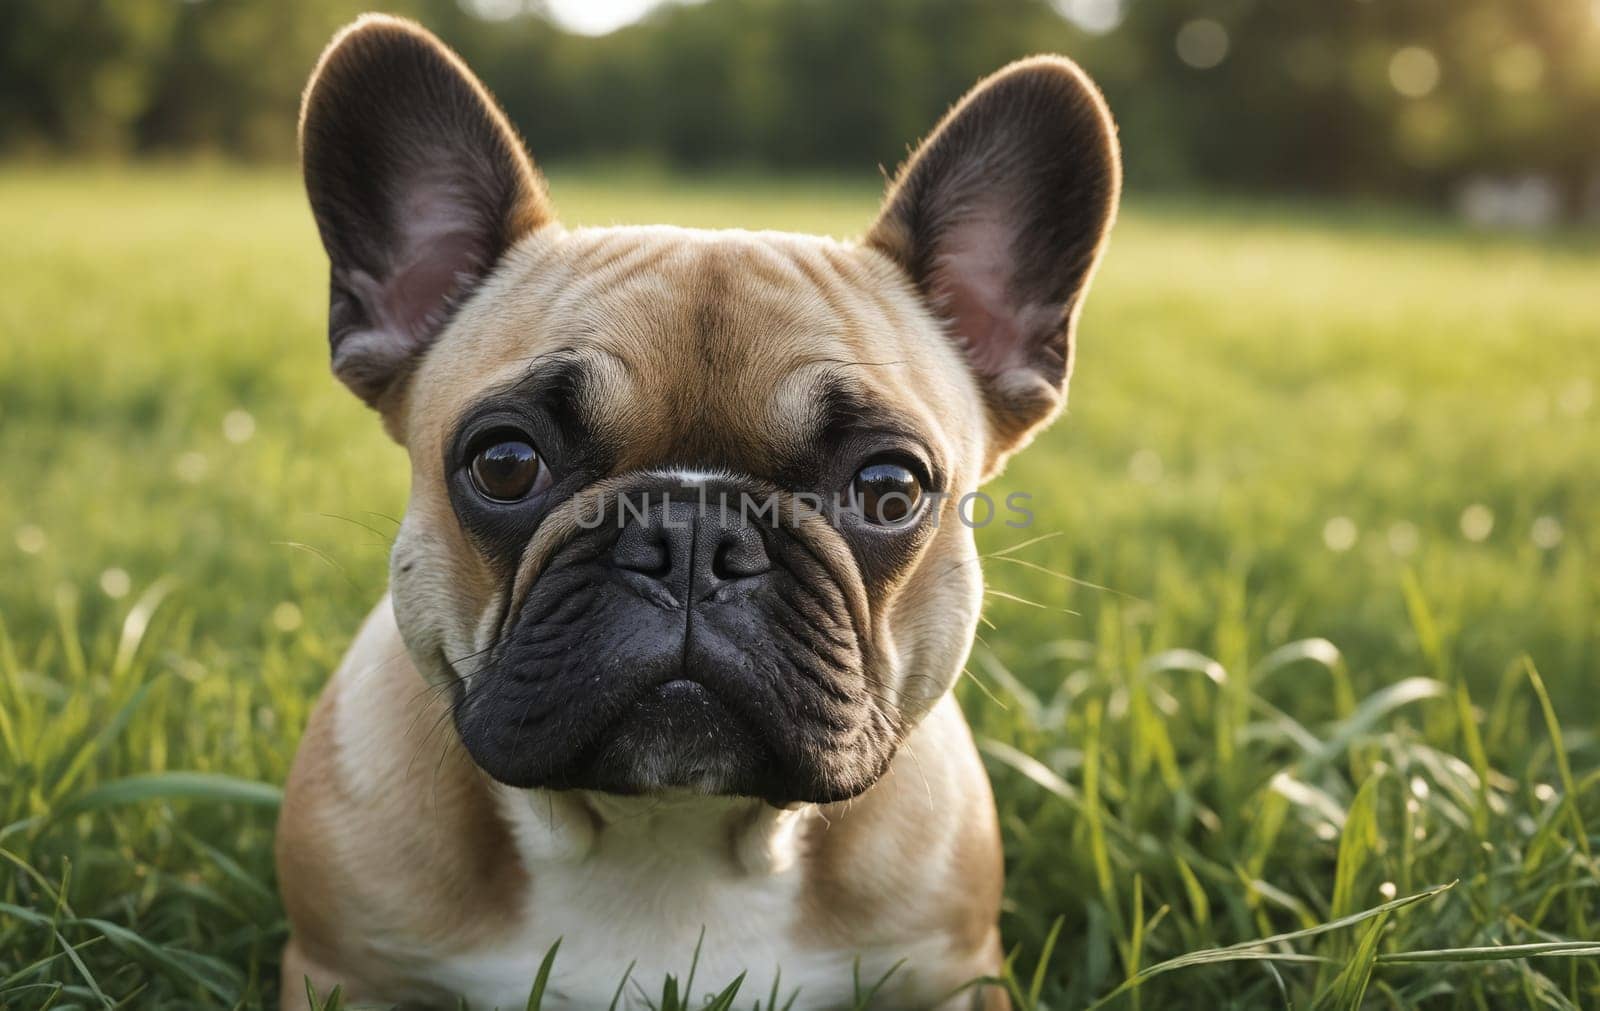 Fawn toy dog with whiskers and wrinkles laying in grass, staring at camera by Andre1ns